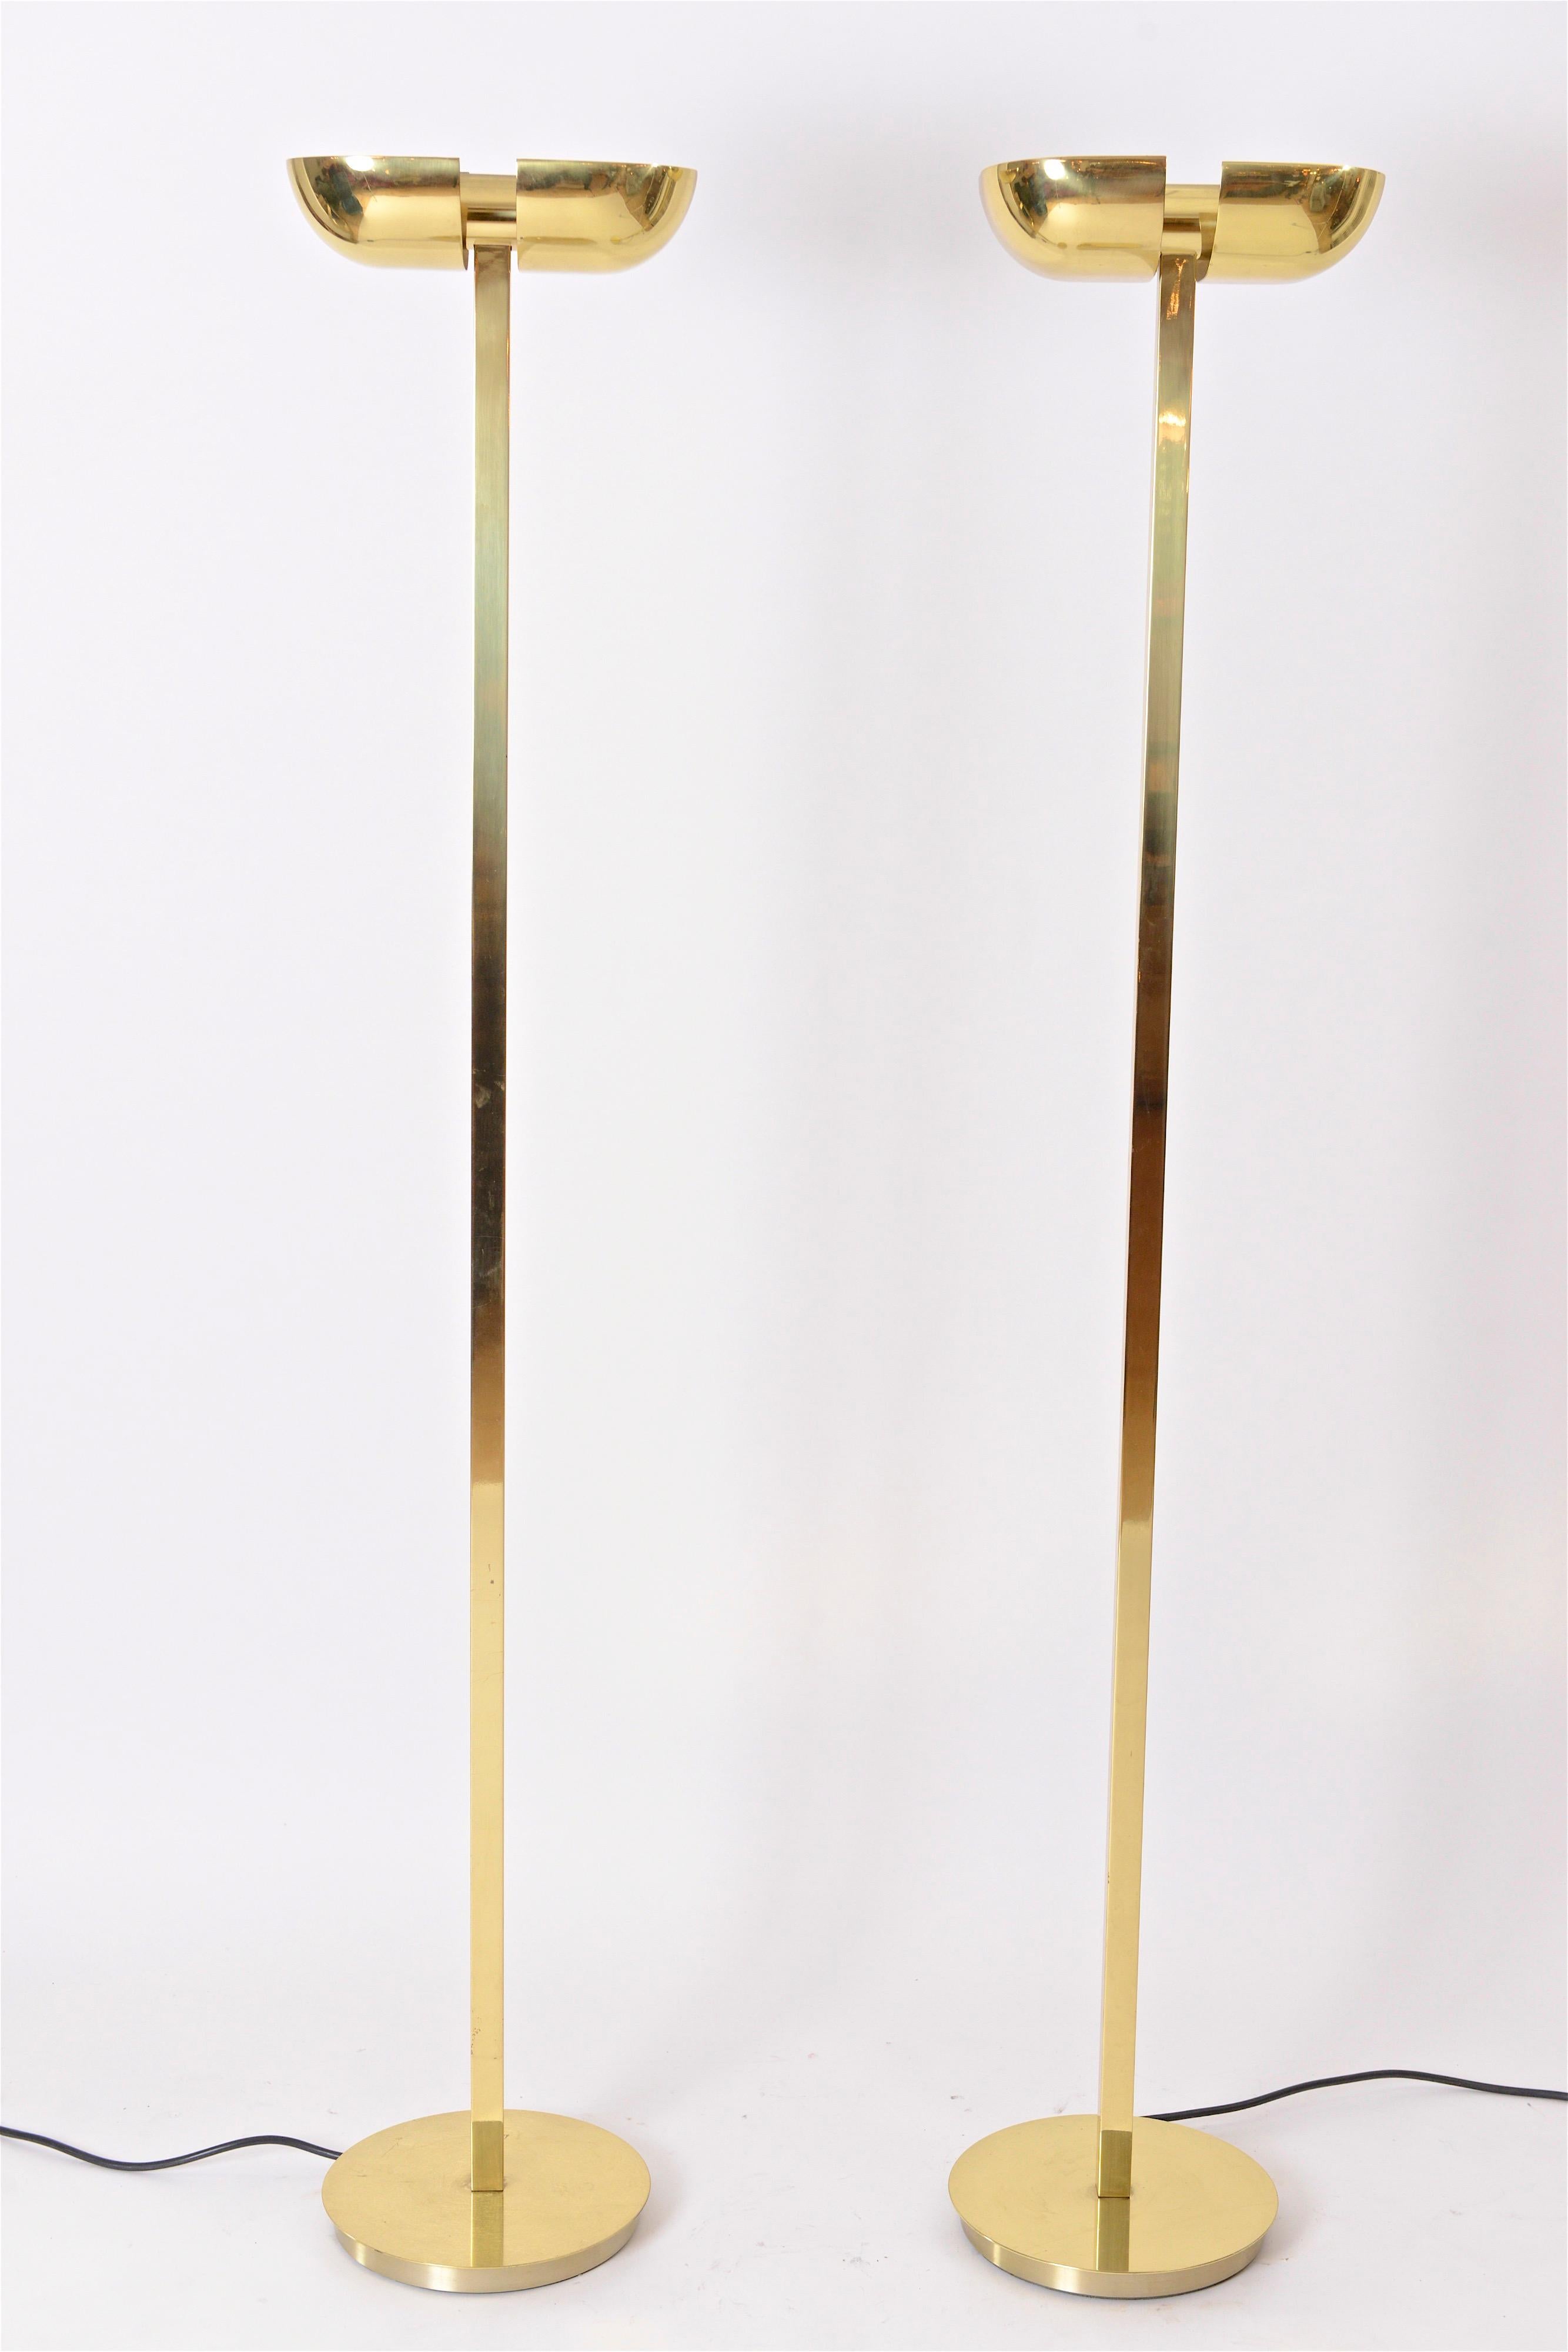 Pair of Adjustable Brass Floor Lamps or Uplighters by Lumi, Italy , circa 1970 1